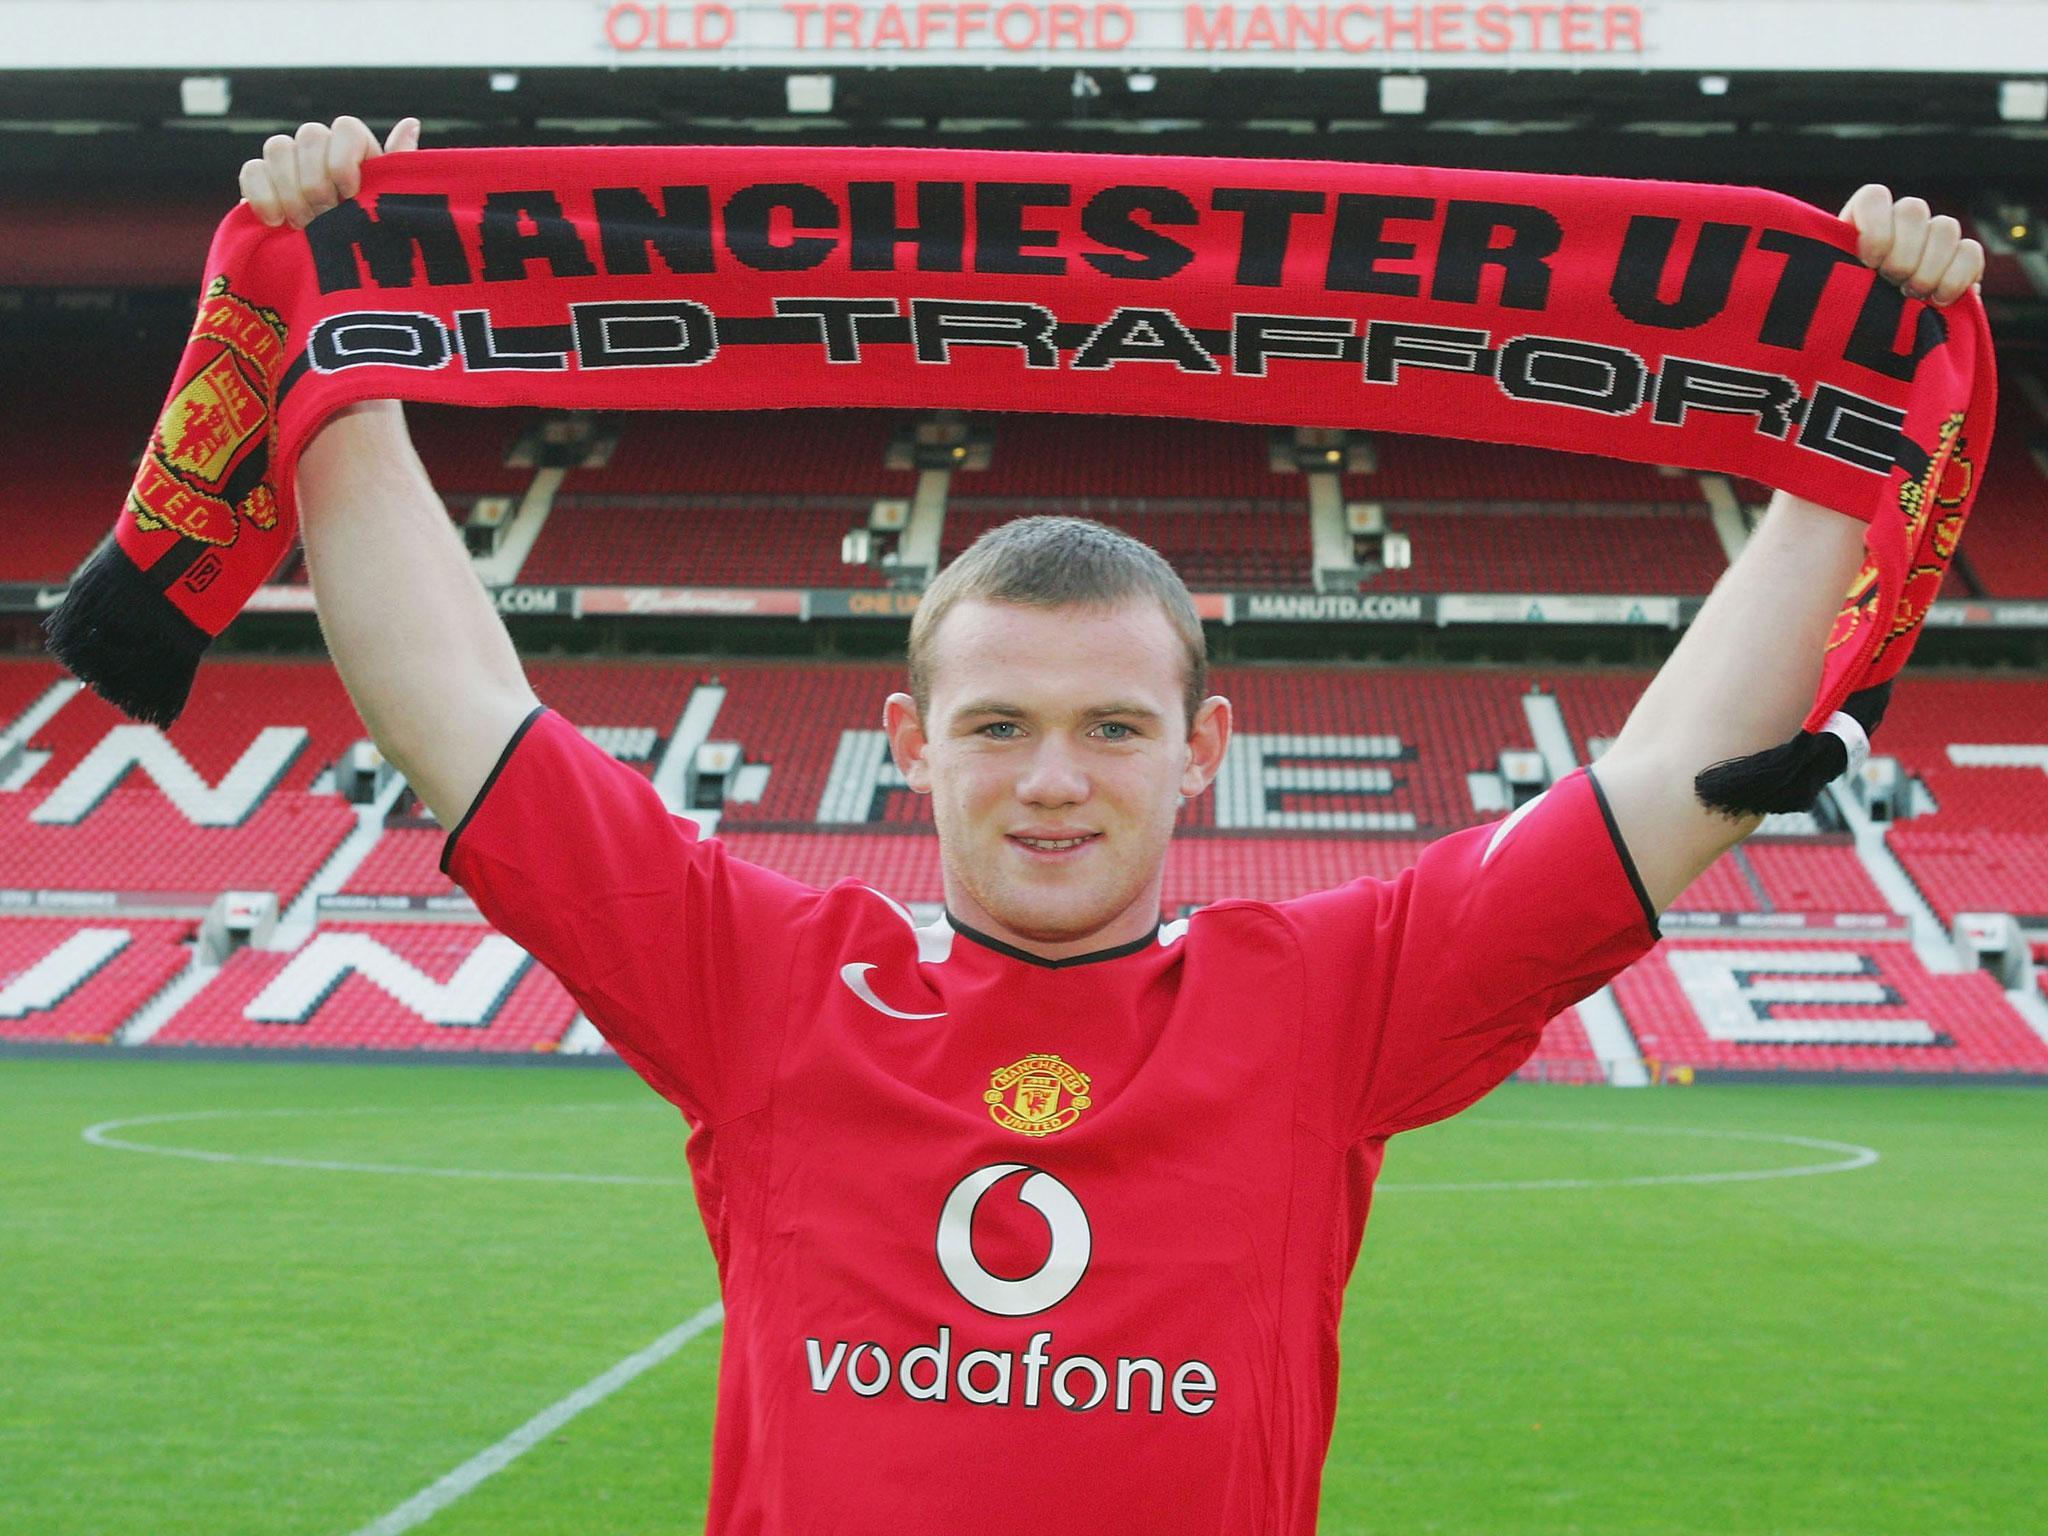 Wayne Rooney What They Said When He Signed For Manchester United In 2004 The Independent The Independent